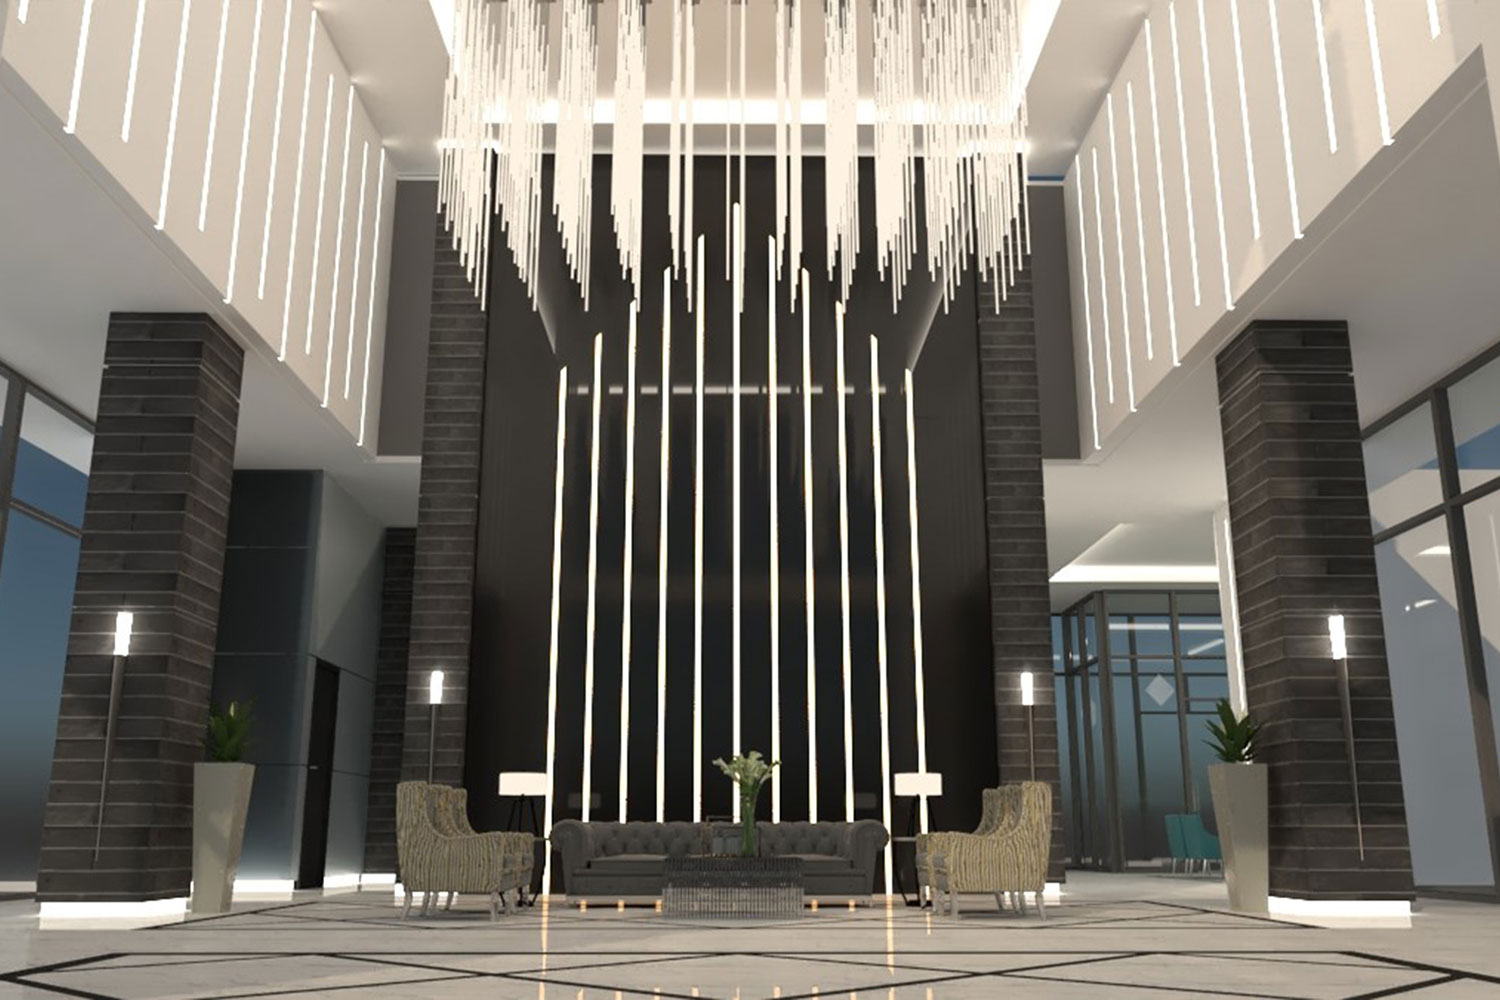 The Barron is an 11-storey Art Deco office tower along Stephen Avenue that Strategic Group is renovating to add 93 residential rental suites.
Courtesy Strategic Group